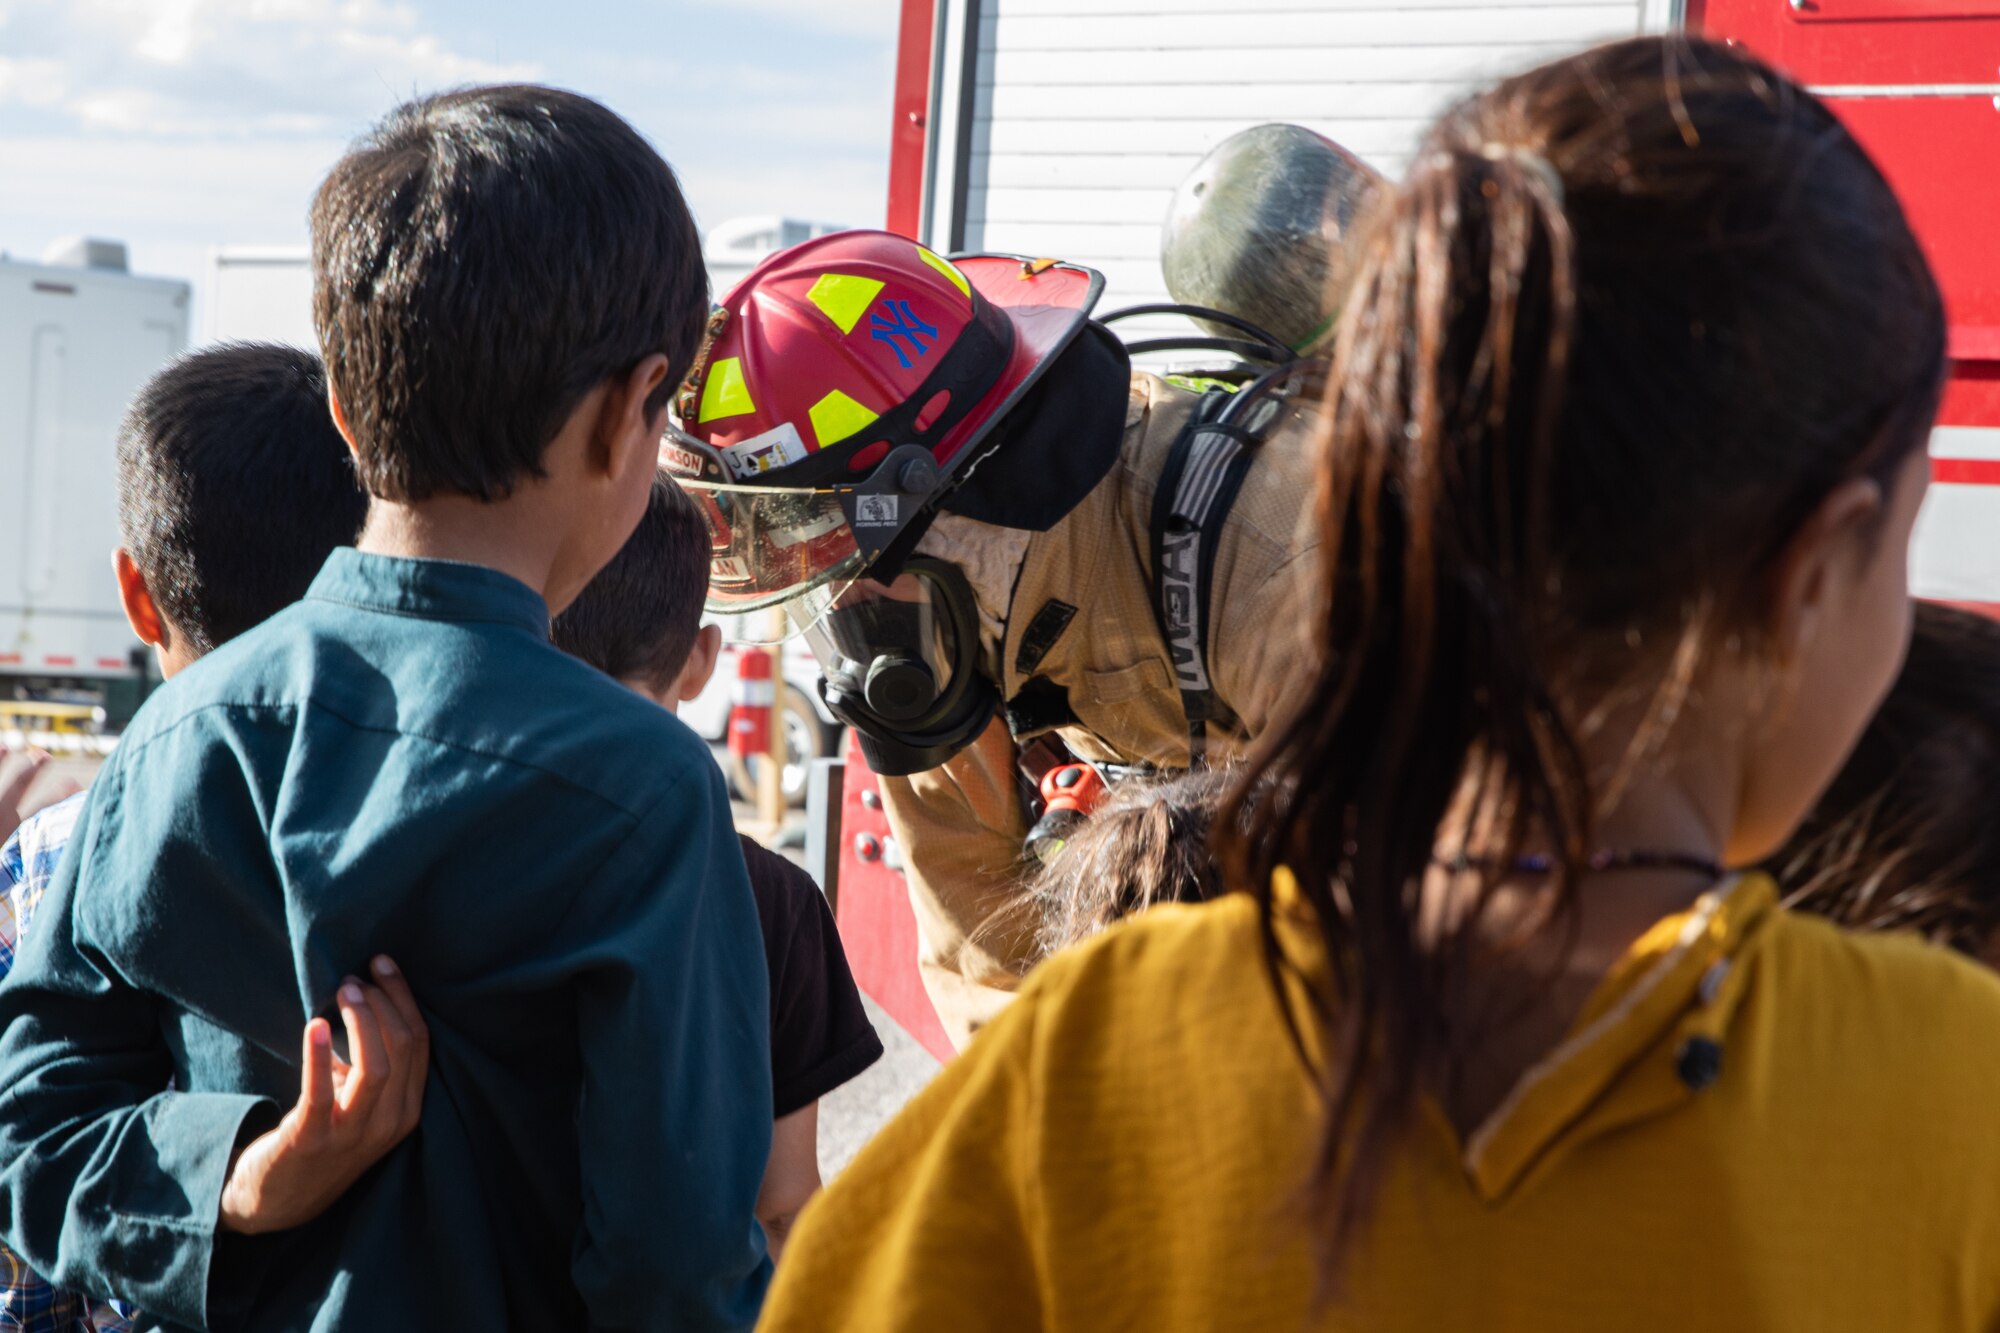 A Task Force-Holloman firefighter speaks with Afghan children at the end of a fire safety class given to young Afghan evacuees on Holloman Air Force Base, New Mexico, Oct. 11, 2021. The Department of Defense, through the U.S. Northern Command, and in support of the Department of State and Department of Homeland Security, is providing transportation, temporary housing, medical screening, and general support for at least 50,000 Afghan evacuees at suitable facilities, in permanent or temporary structures, as quickly as possible. This initiative provides Afghan evacuees essential support at secure locations outside Afghanistan. (U.S. Army photo by Spc. Nicholas Goodman)